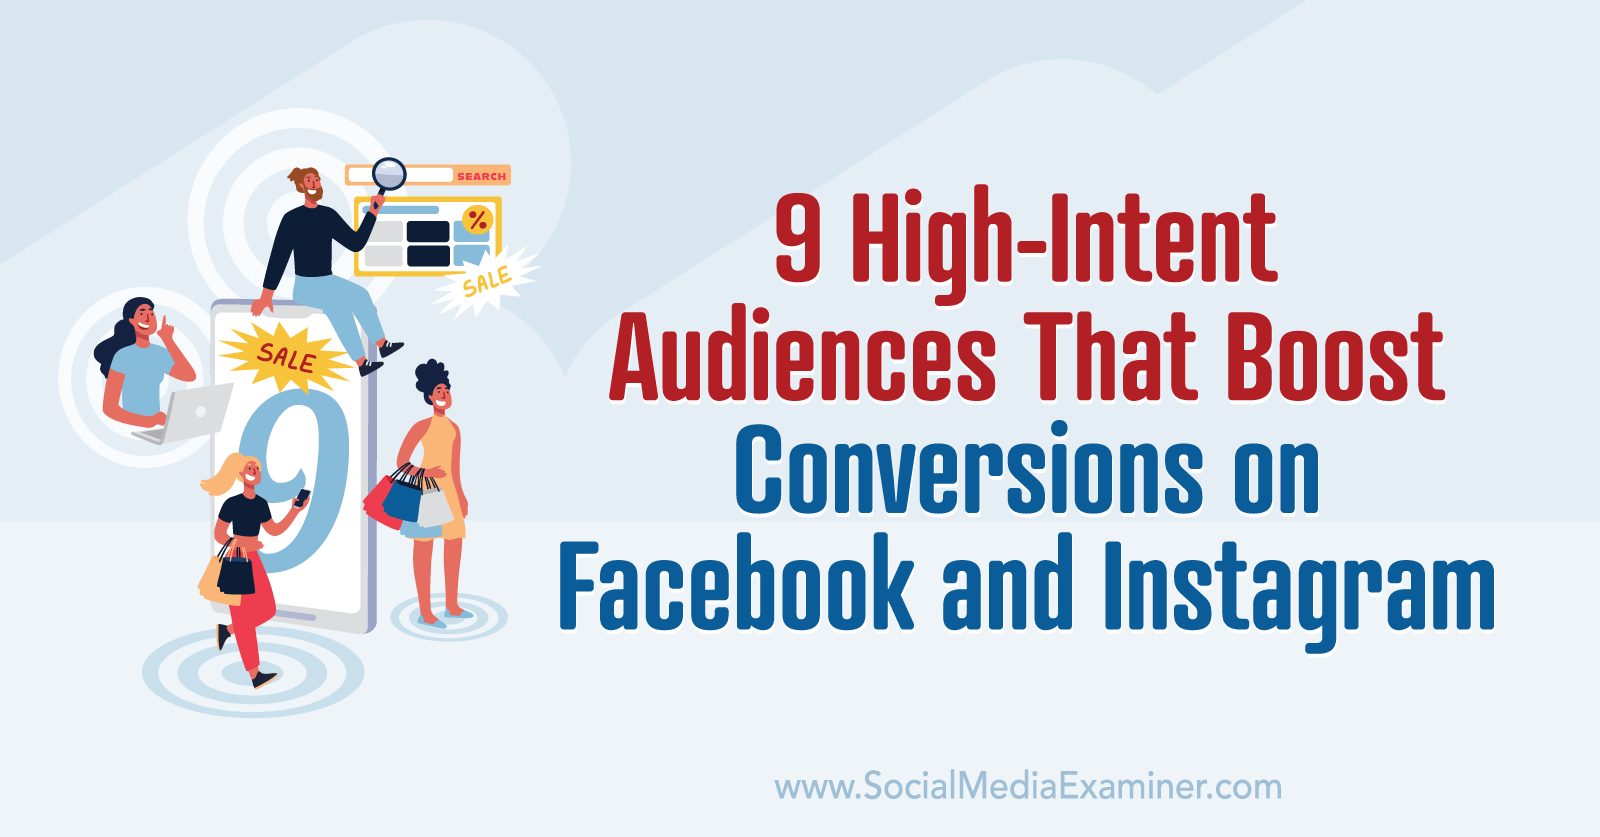 9 High-Intent Audiences That Boost Conversions on Facebook and Instagram by Social Media Examiner